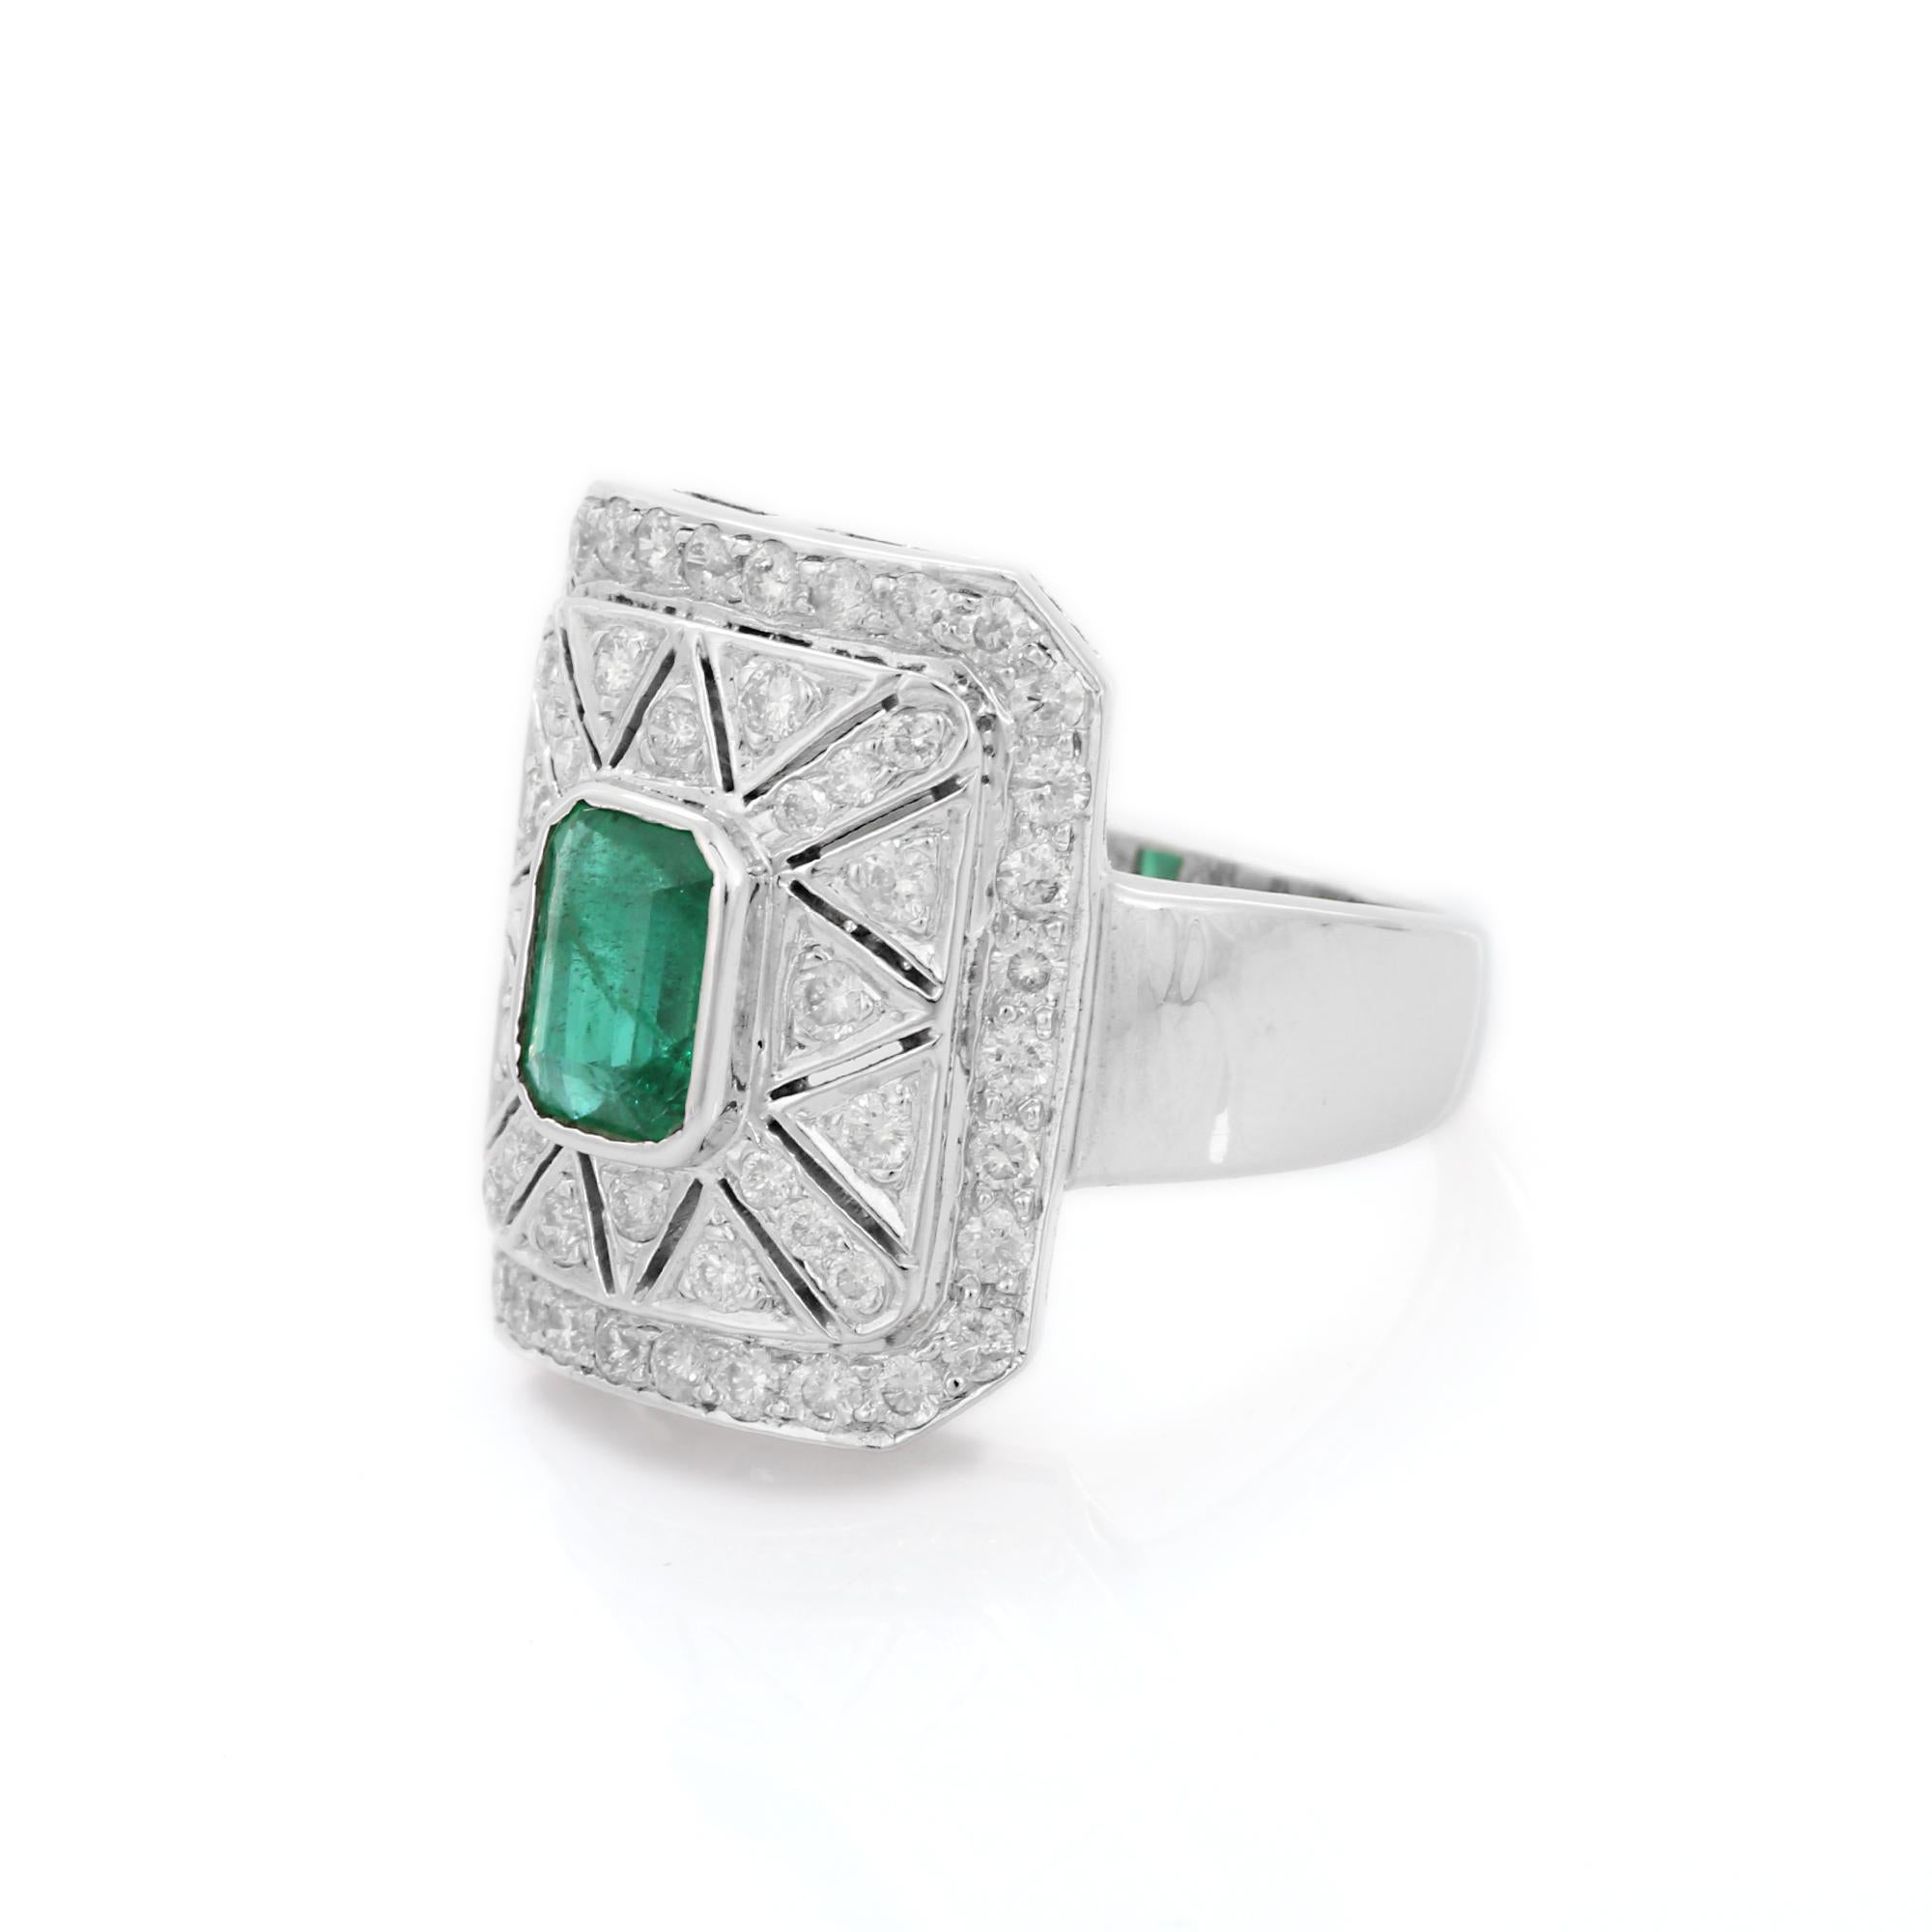 For Sale:  18K White Gold Emerald and Diamond Wedding Ring 3